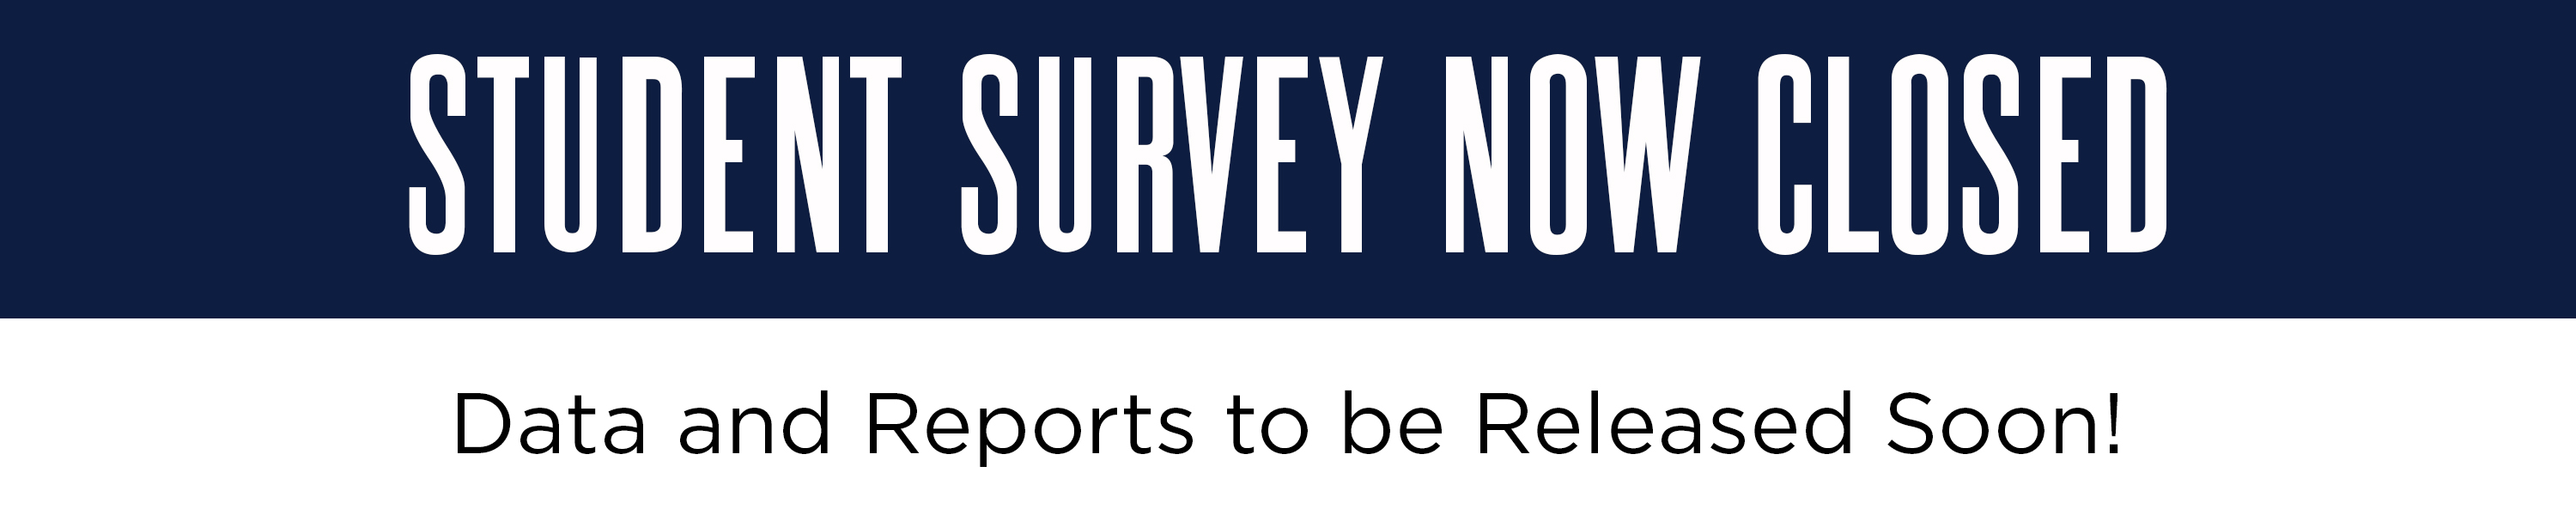 Student Survey Now Closed Banner Image